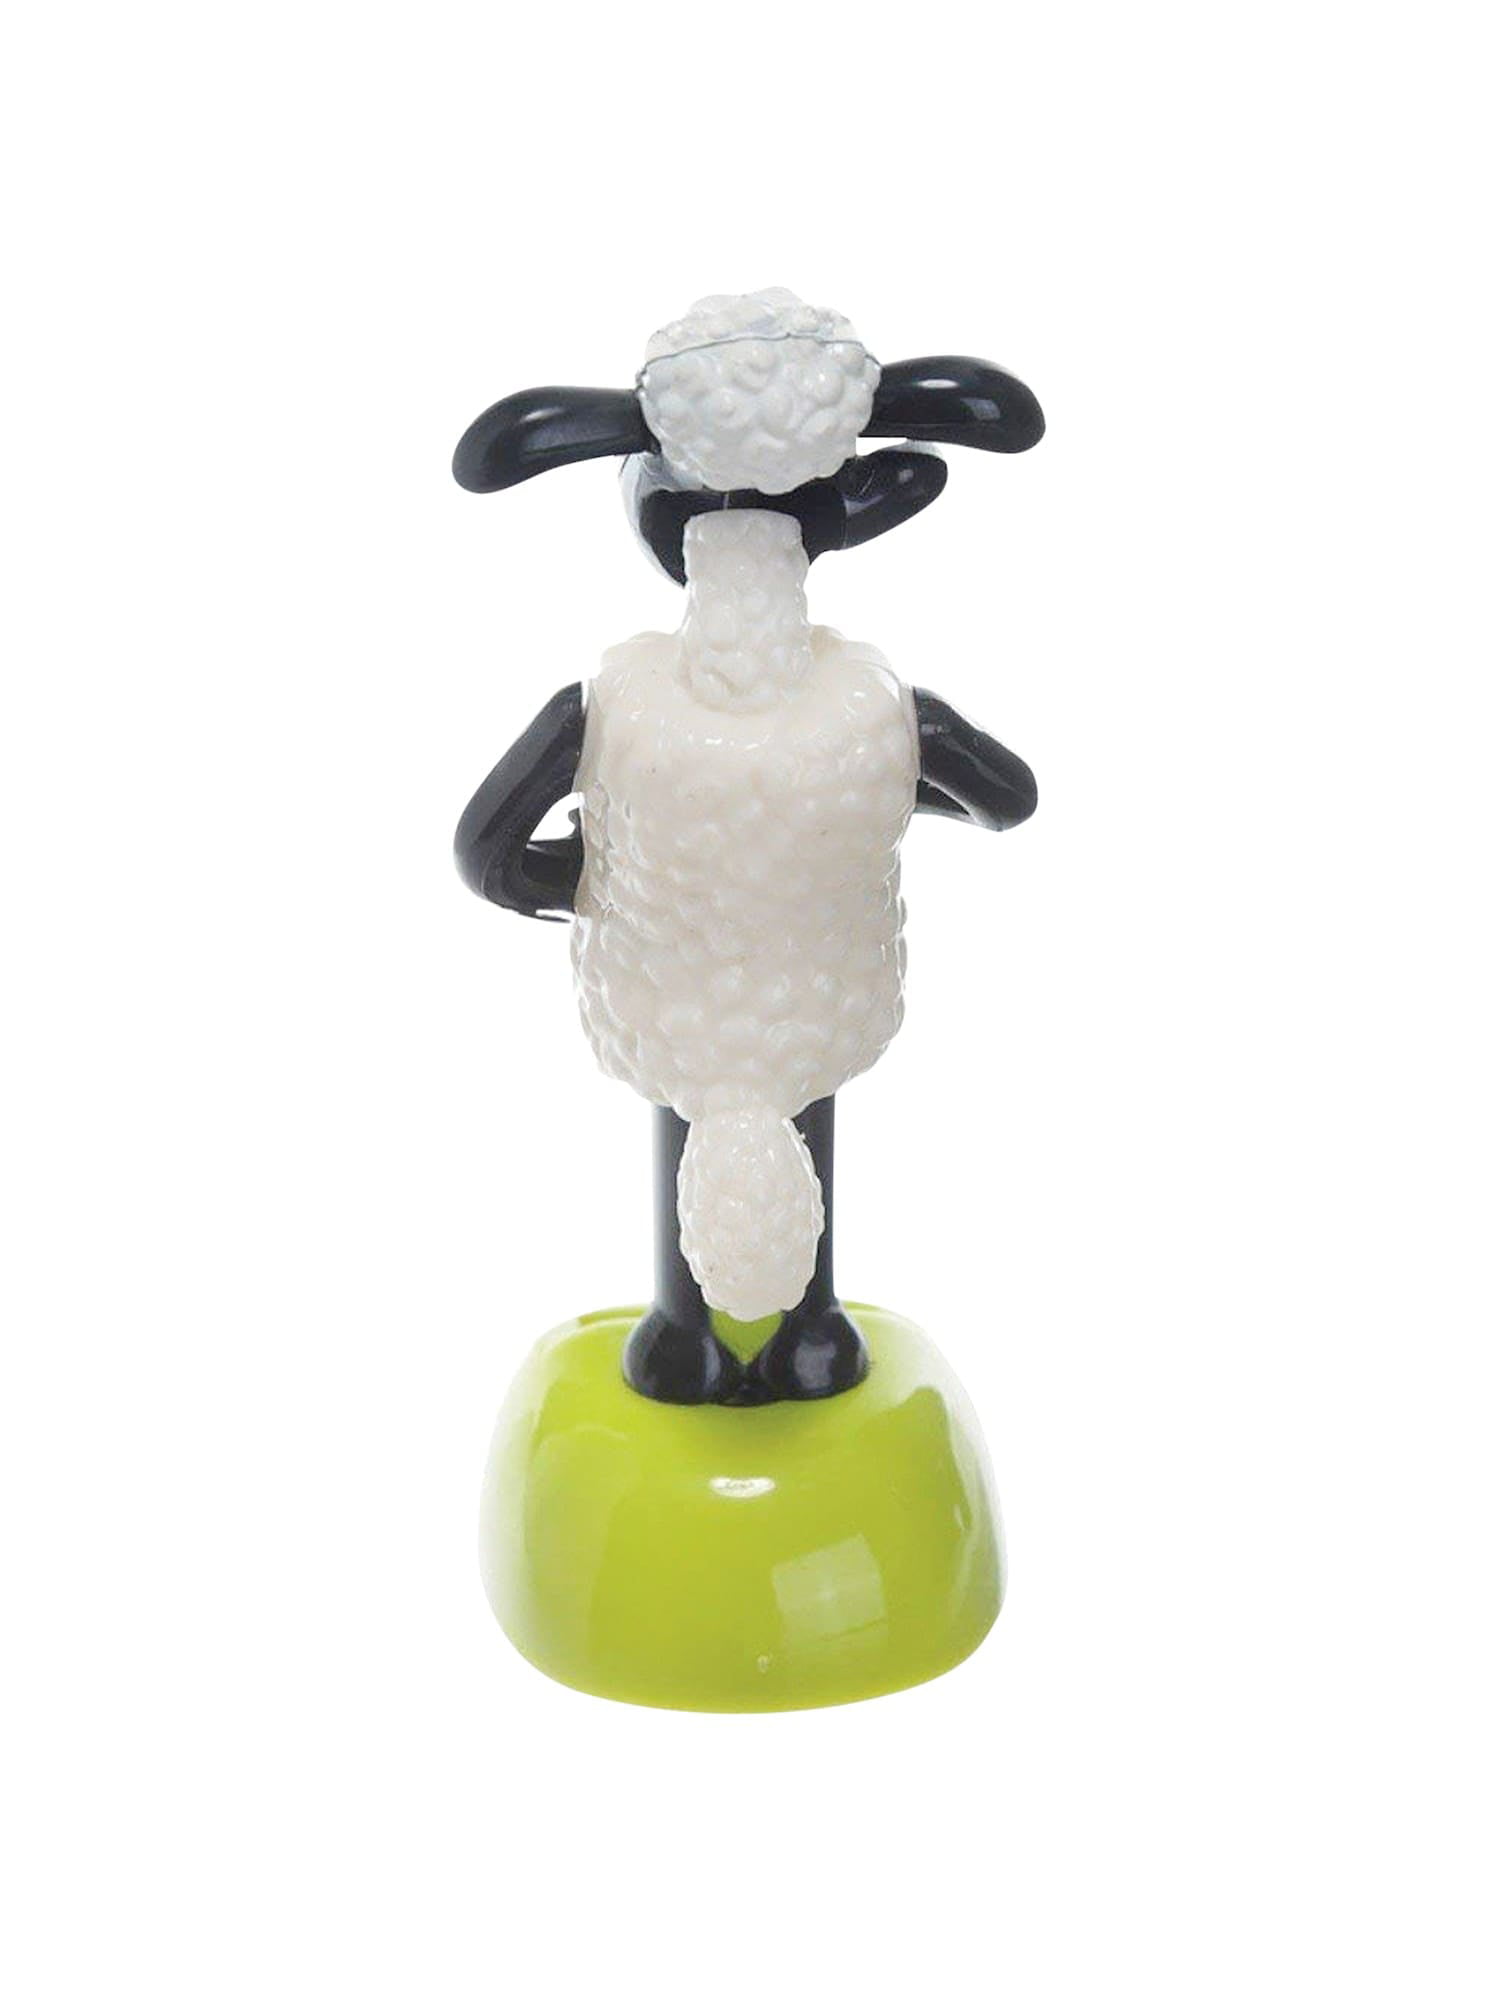 Solar Power/Powered ~ SHAUN THE SHEEP Wallace & Gromit ~ No Batteries Required 